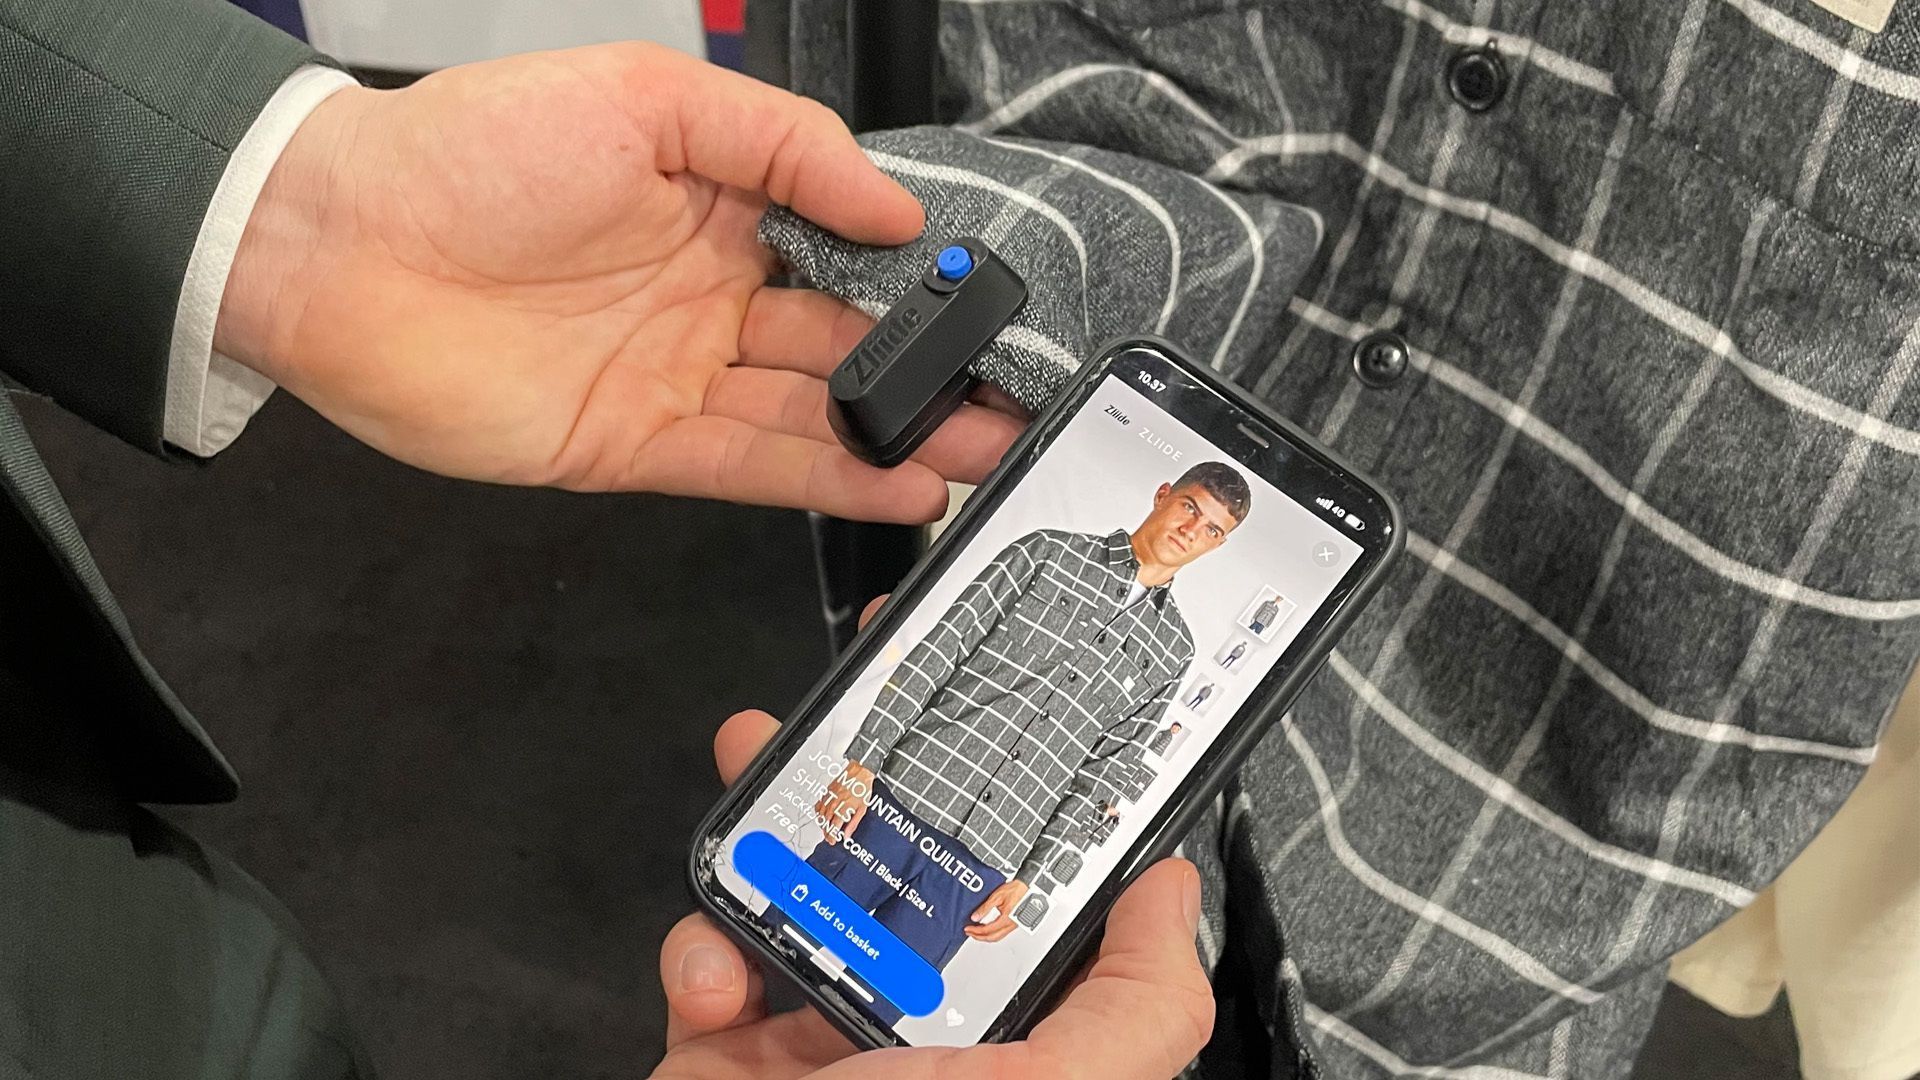 A digital fob attached to a shirt with an iphone next to it.